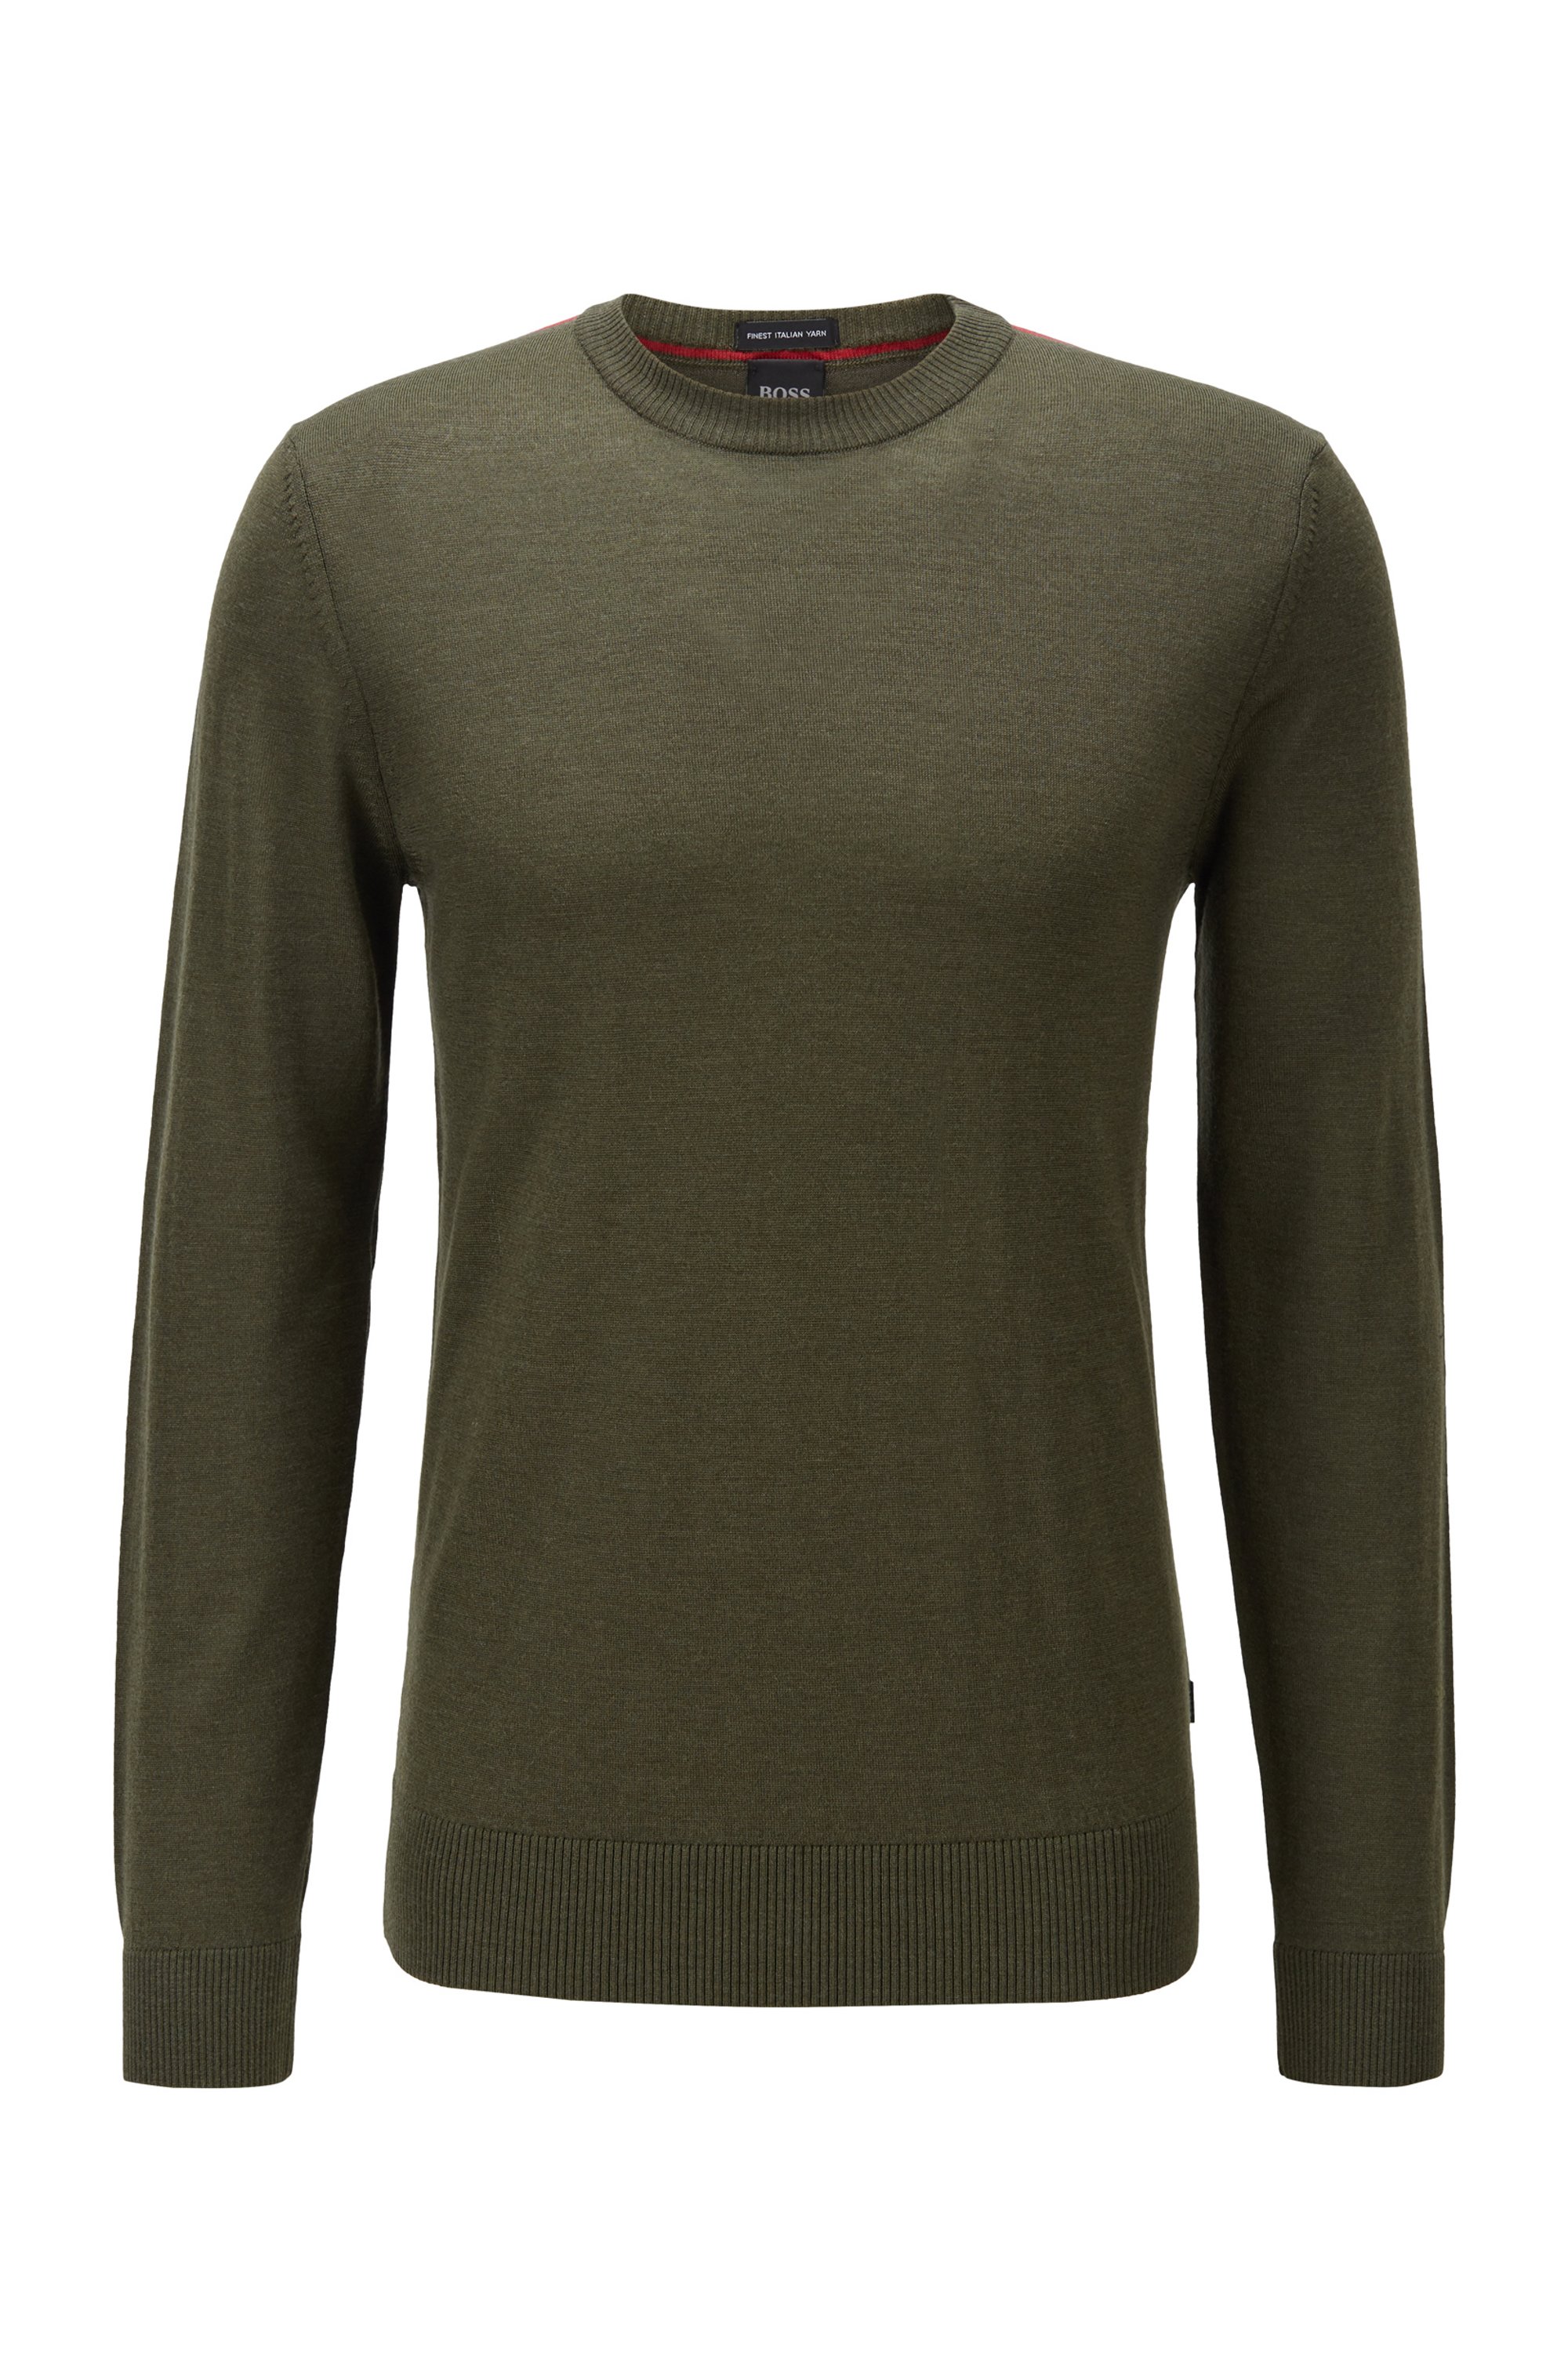 Wool-blend sweater with striped detail, Light Green